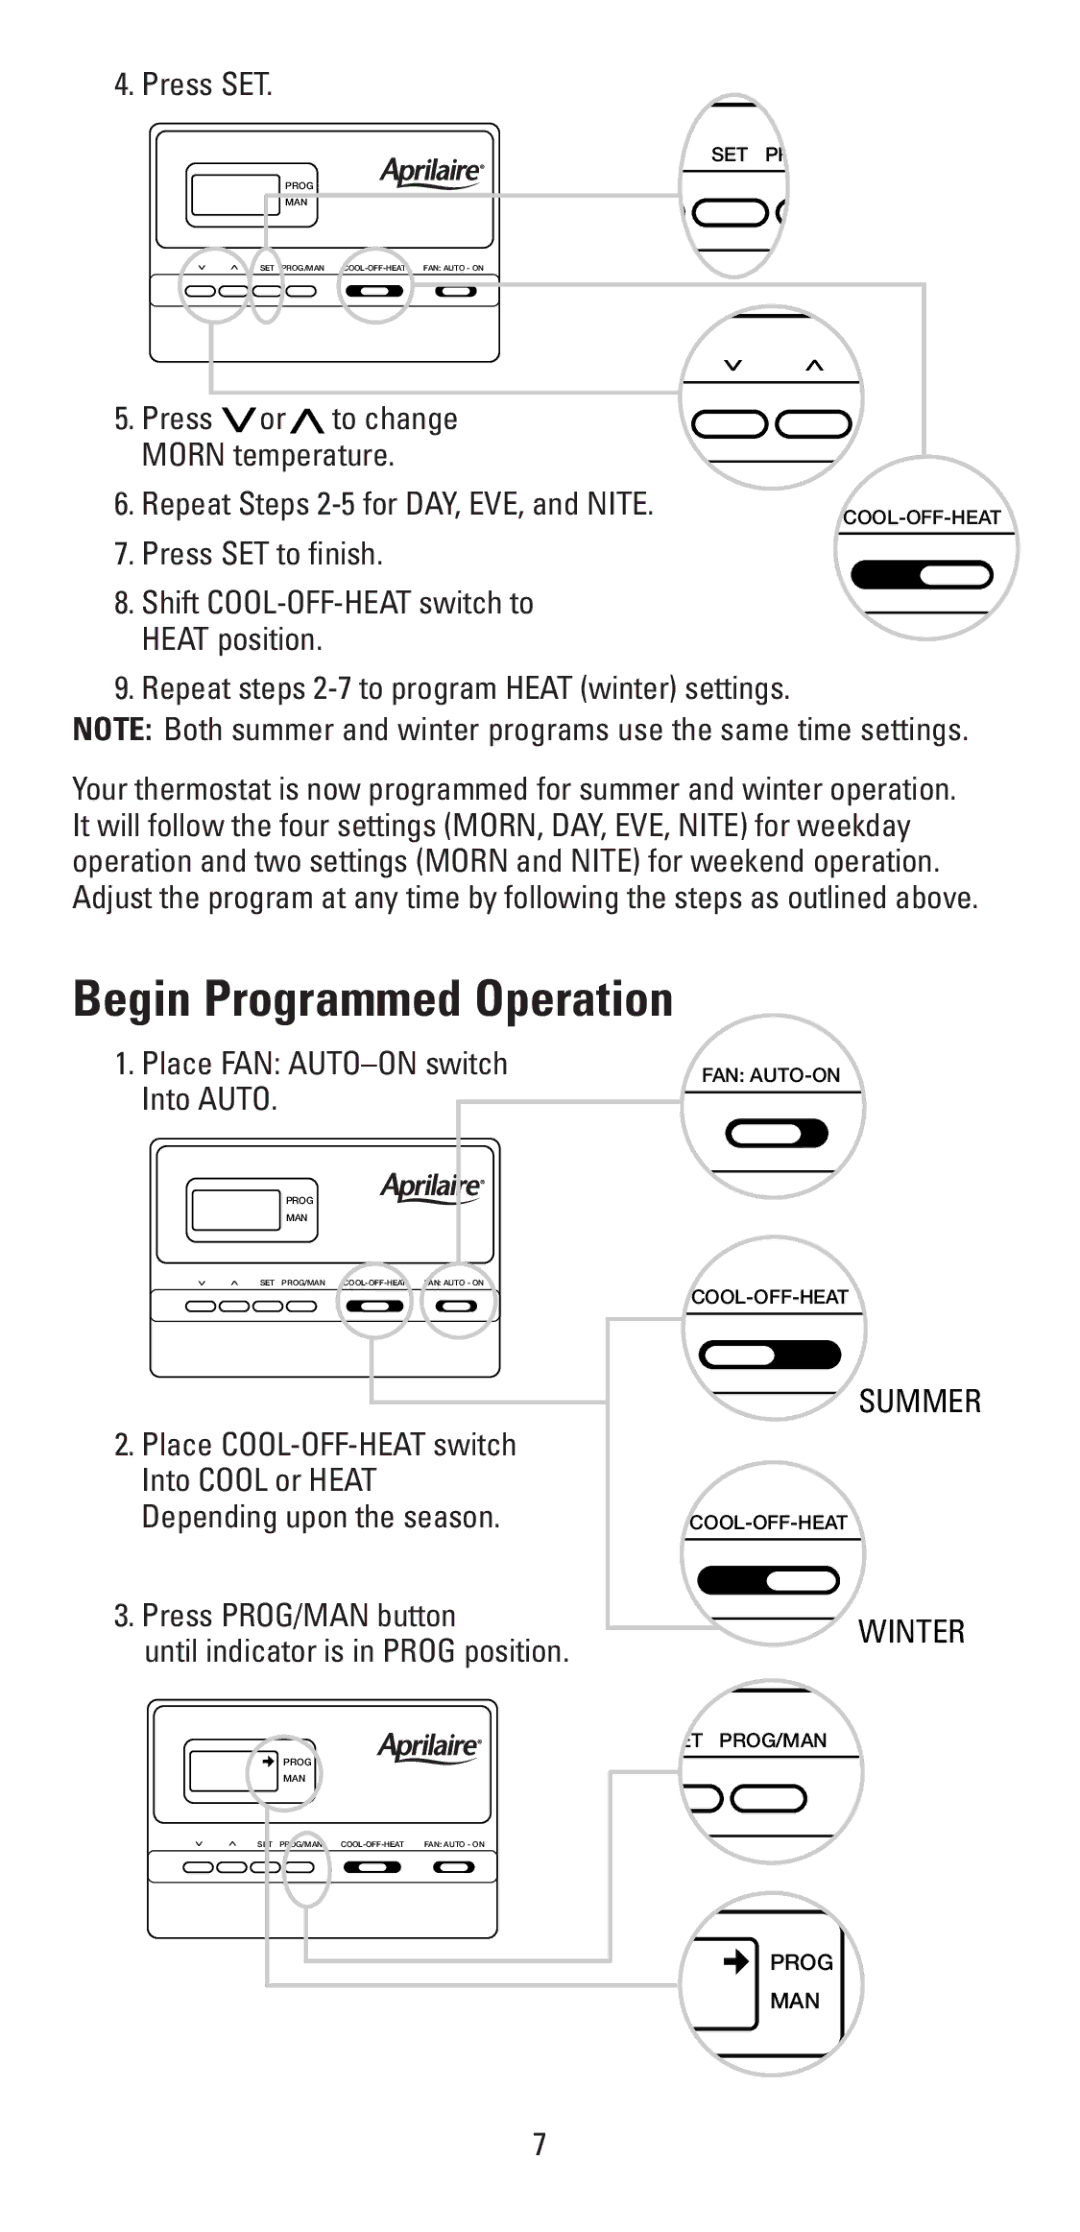 Aprilaire 8353 warranty Begin Programmed Operation, Press SET, Repeat Steps 2-5 for DAY, EVE, and Nite 